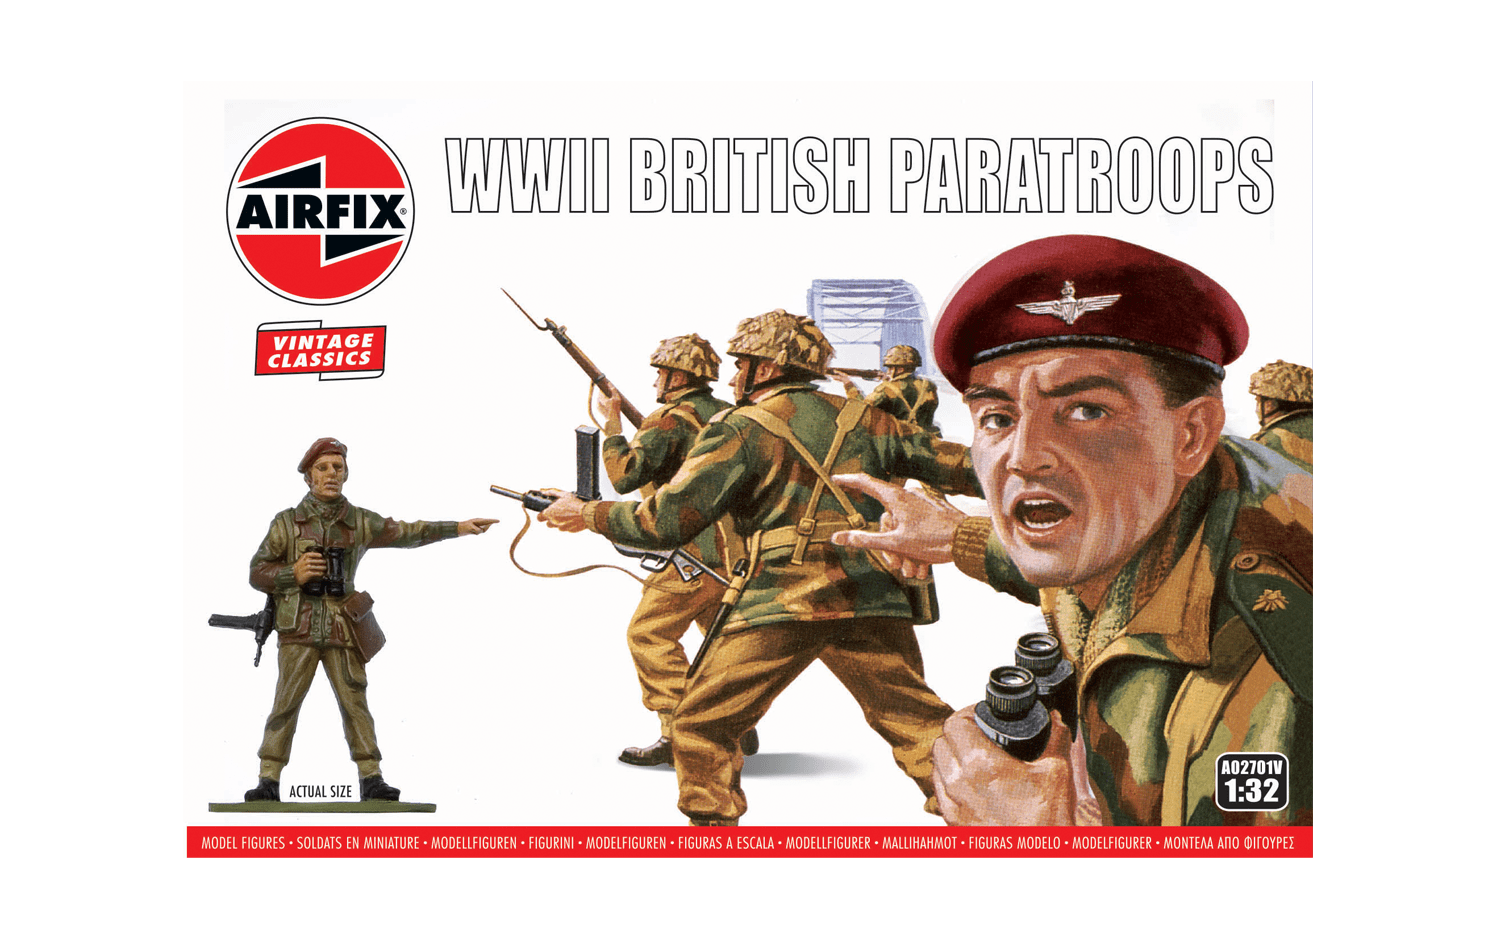 WWII British Paratroops (1:32) - Loaded Dice Barry Vale of Glamorgan CF64 3HD